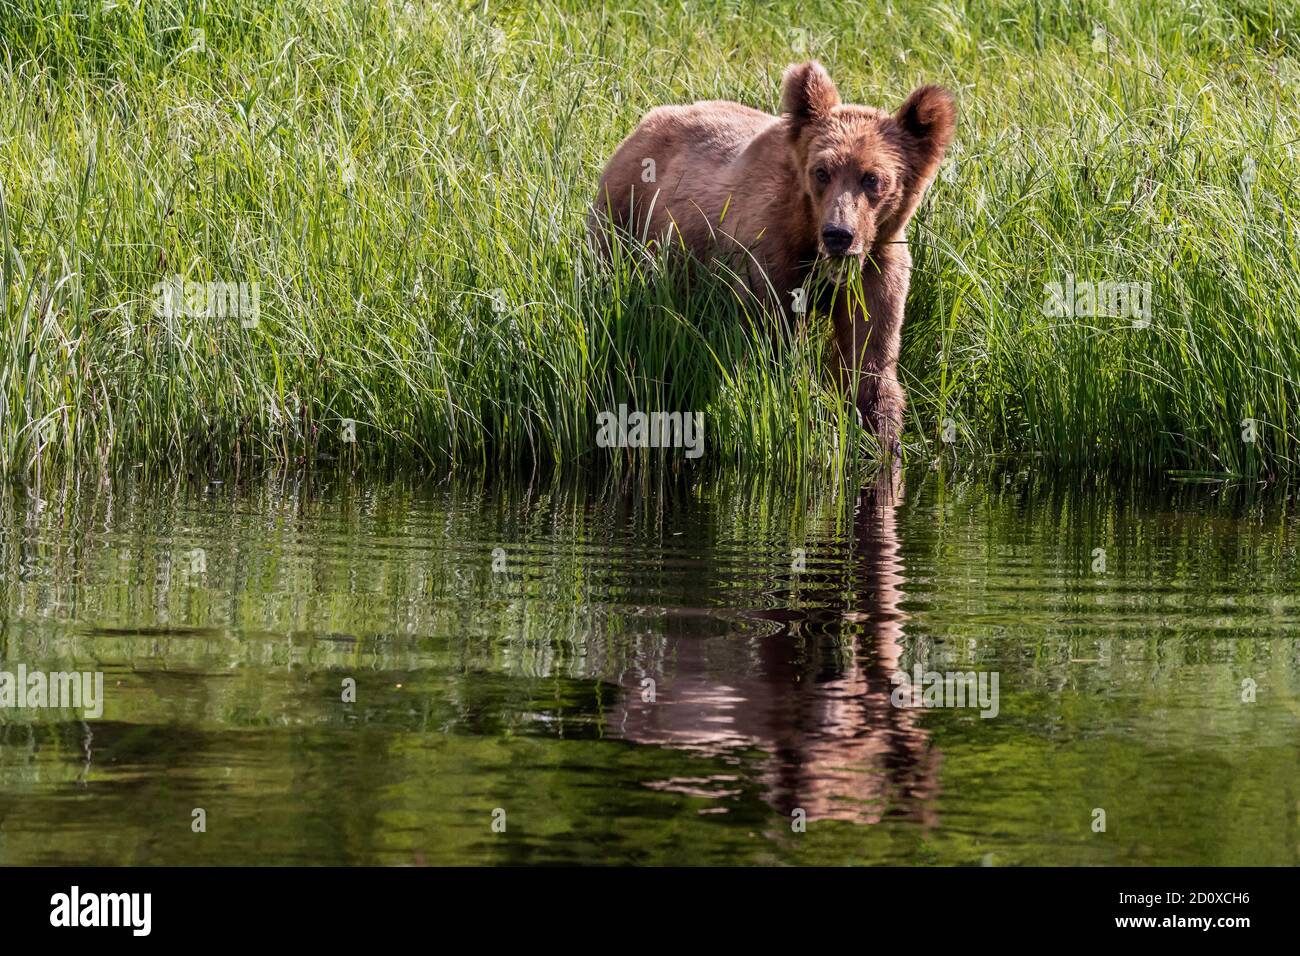 Reflected grizzly cub eating sedge grass at the water's edge, Khutzeymateen, BC Stock Photo